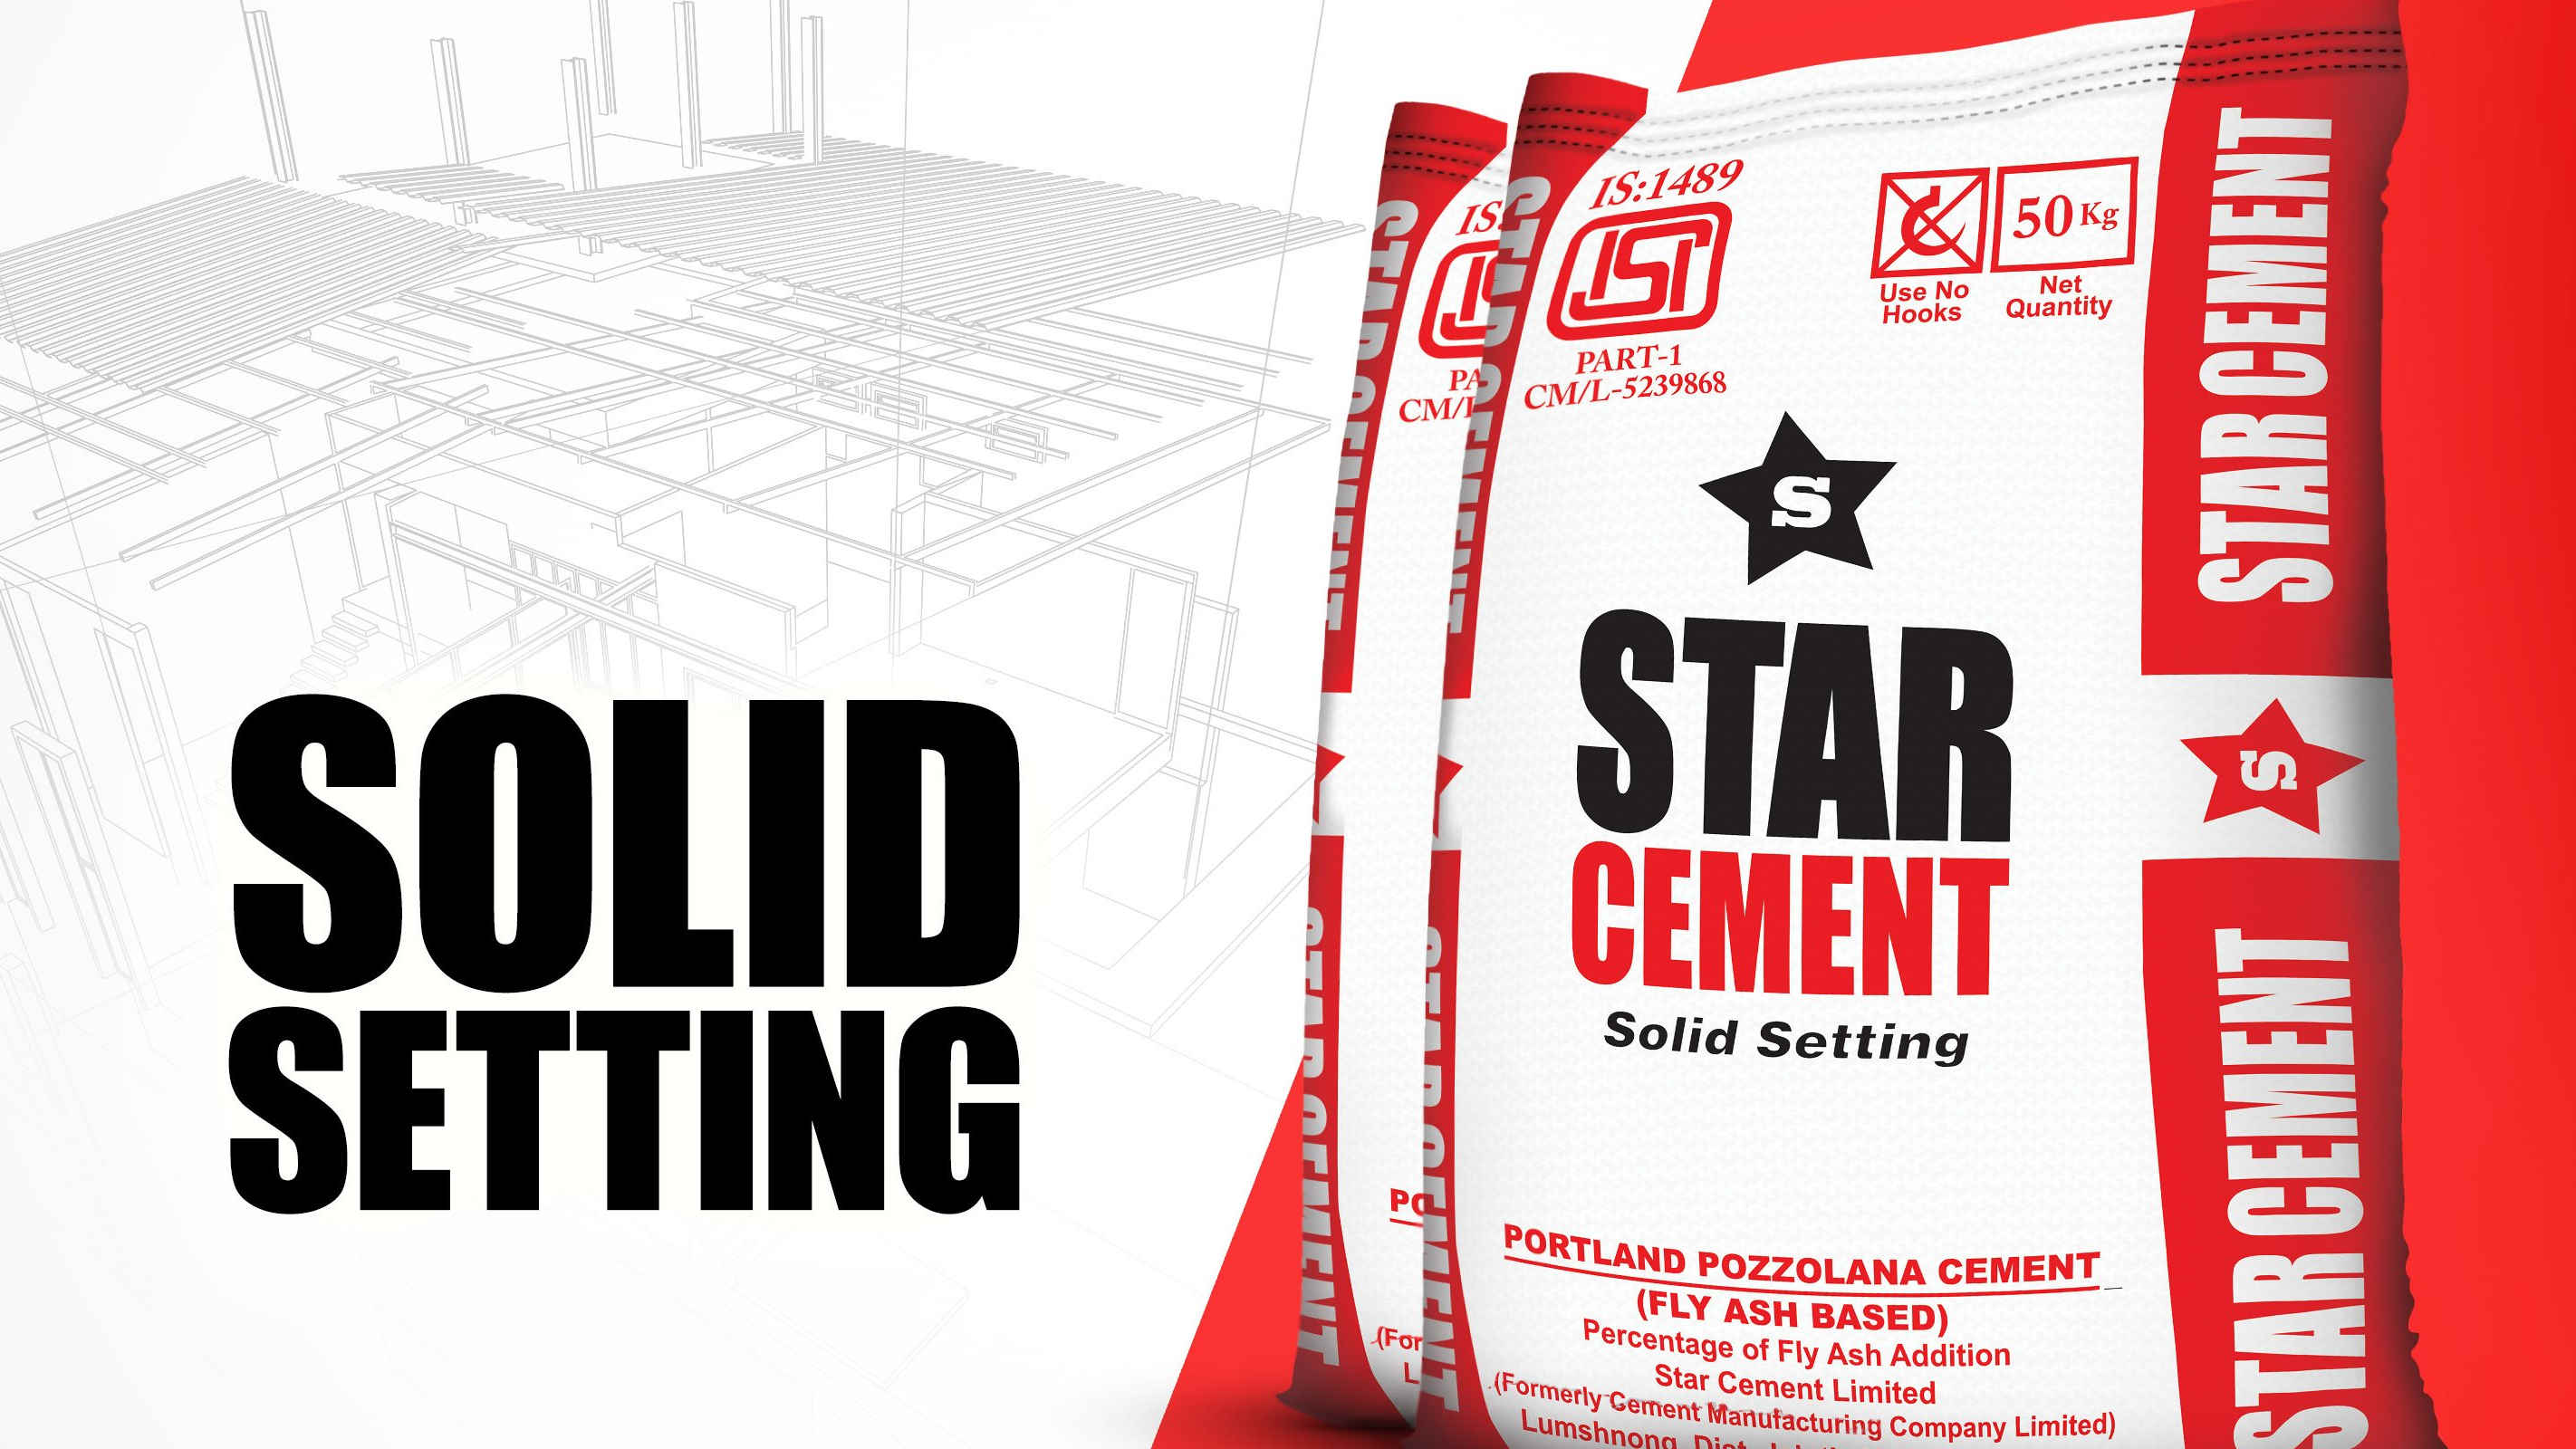 THREE STAR Cement Products